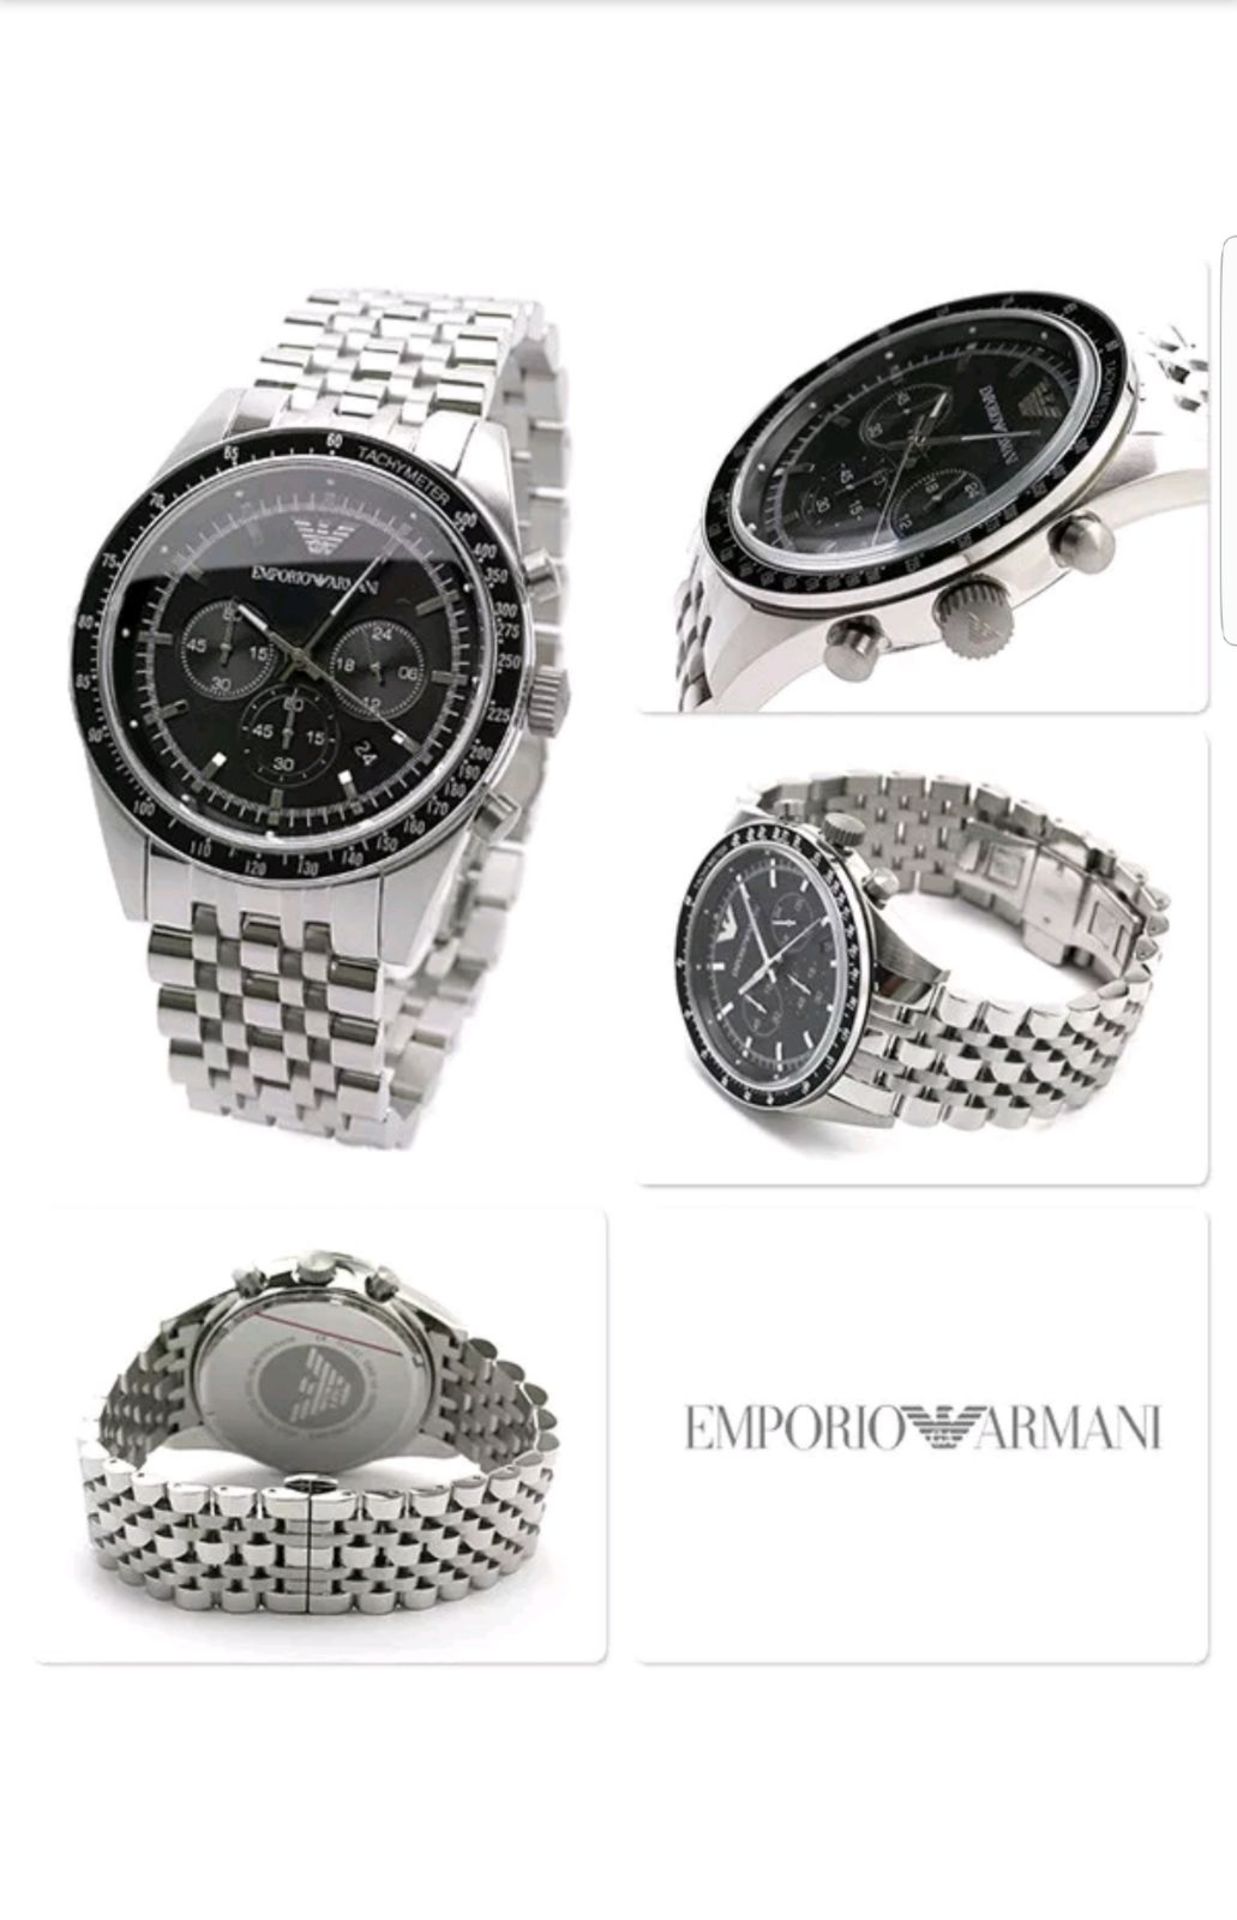 BRAND NEW GENTS EMPORIO ARMANI WATCH AR5988, COMPLETE WITH ORIGINAL PACKAGING AND MANUAL - FREE